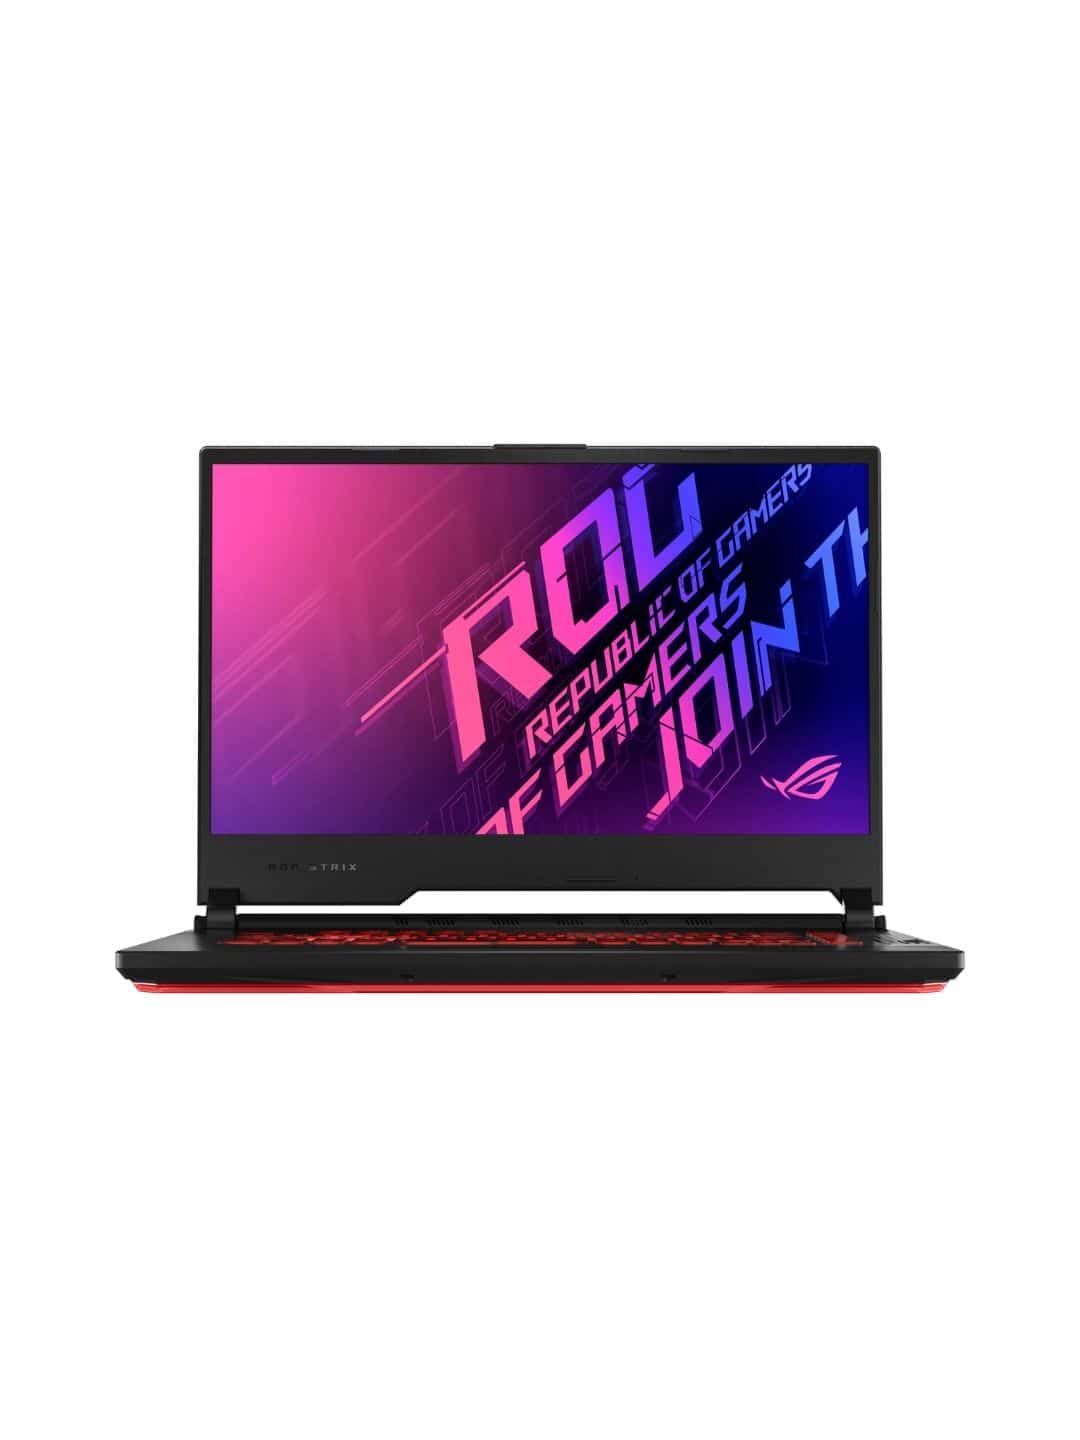 ASUS ROG gaming laptop with i5 processor